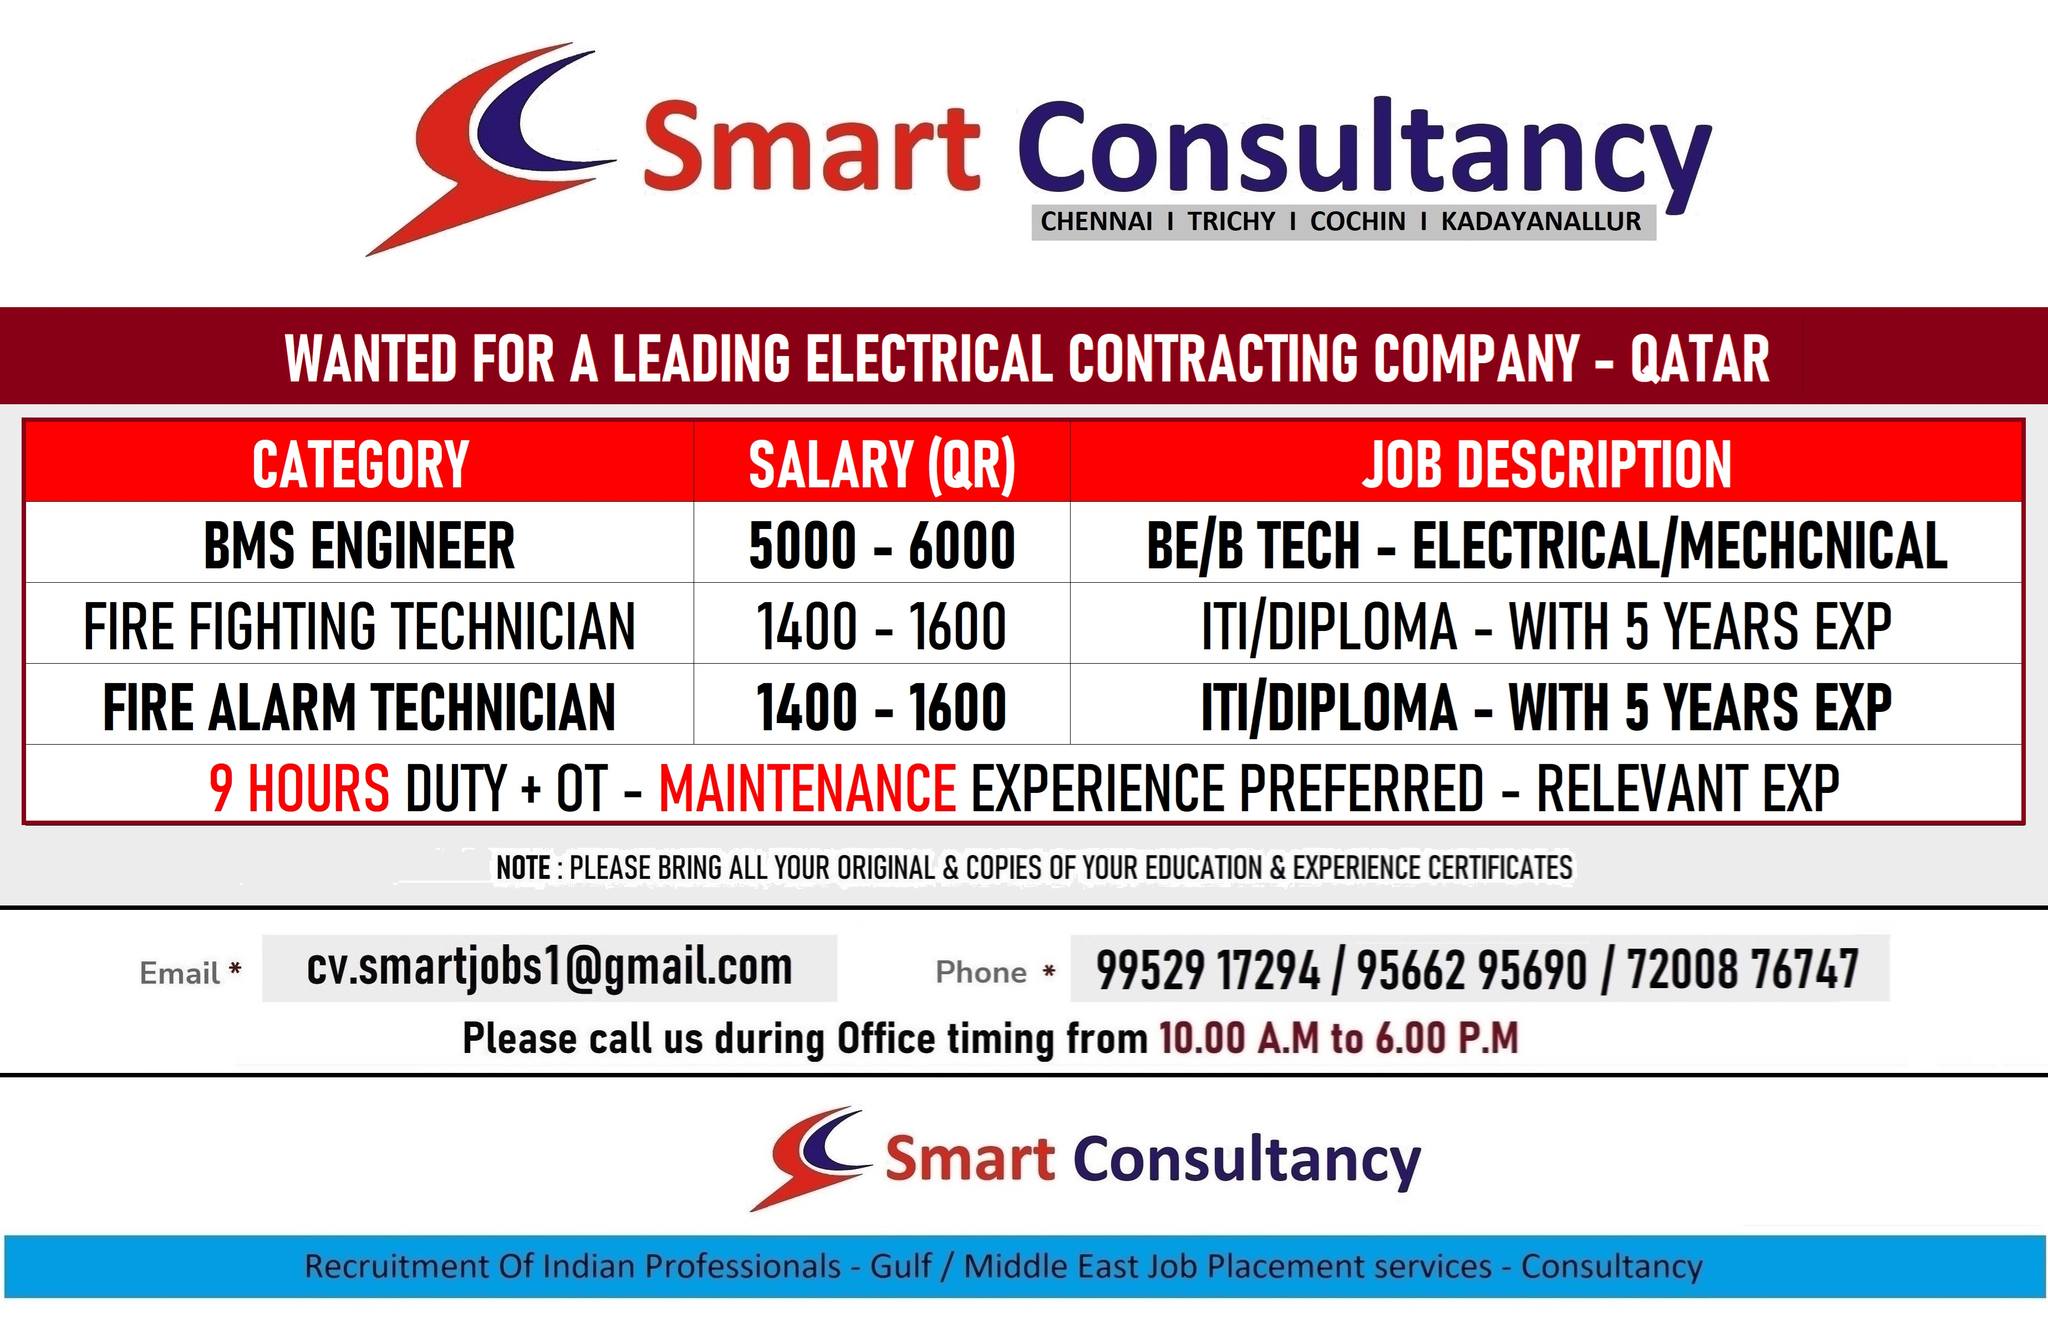 WANTED FOR A LEADING ELECTRICAL CONTRACTING COMPANY - QATAR